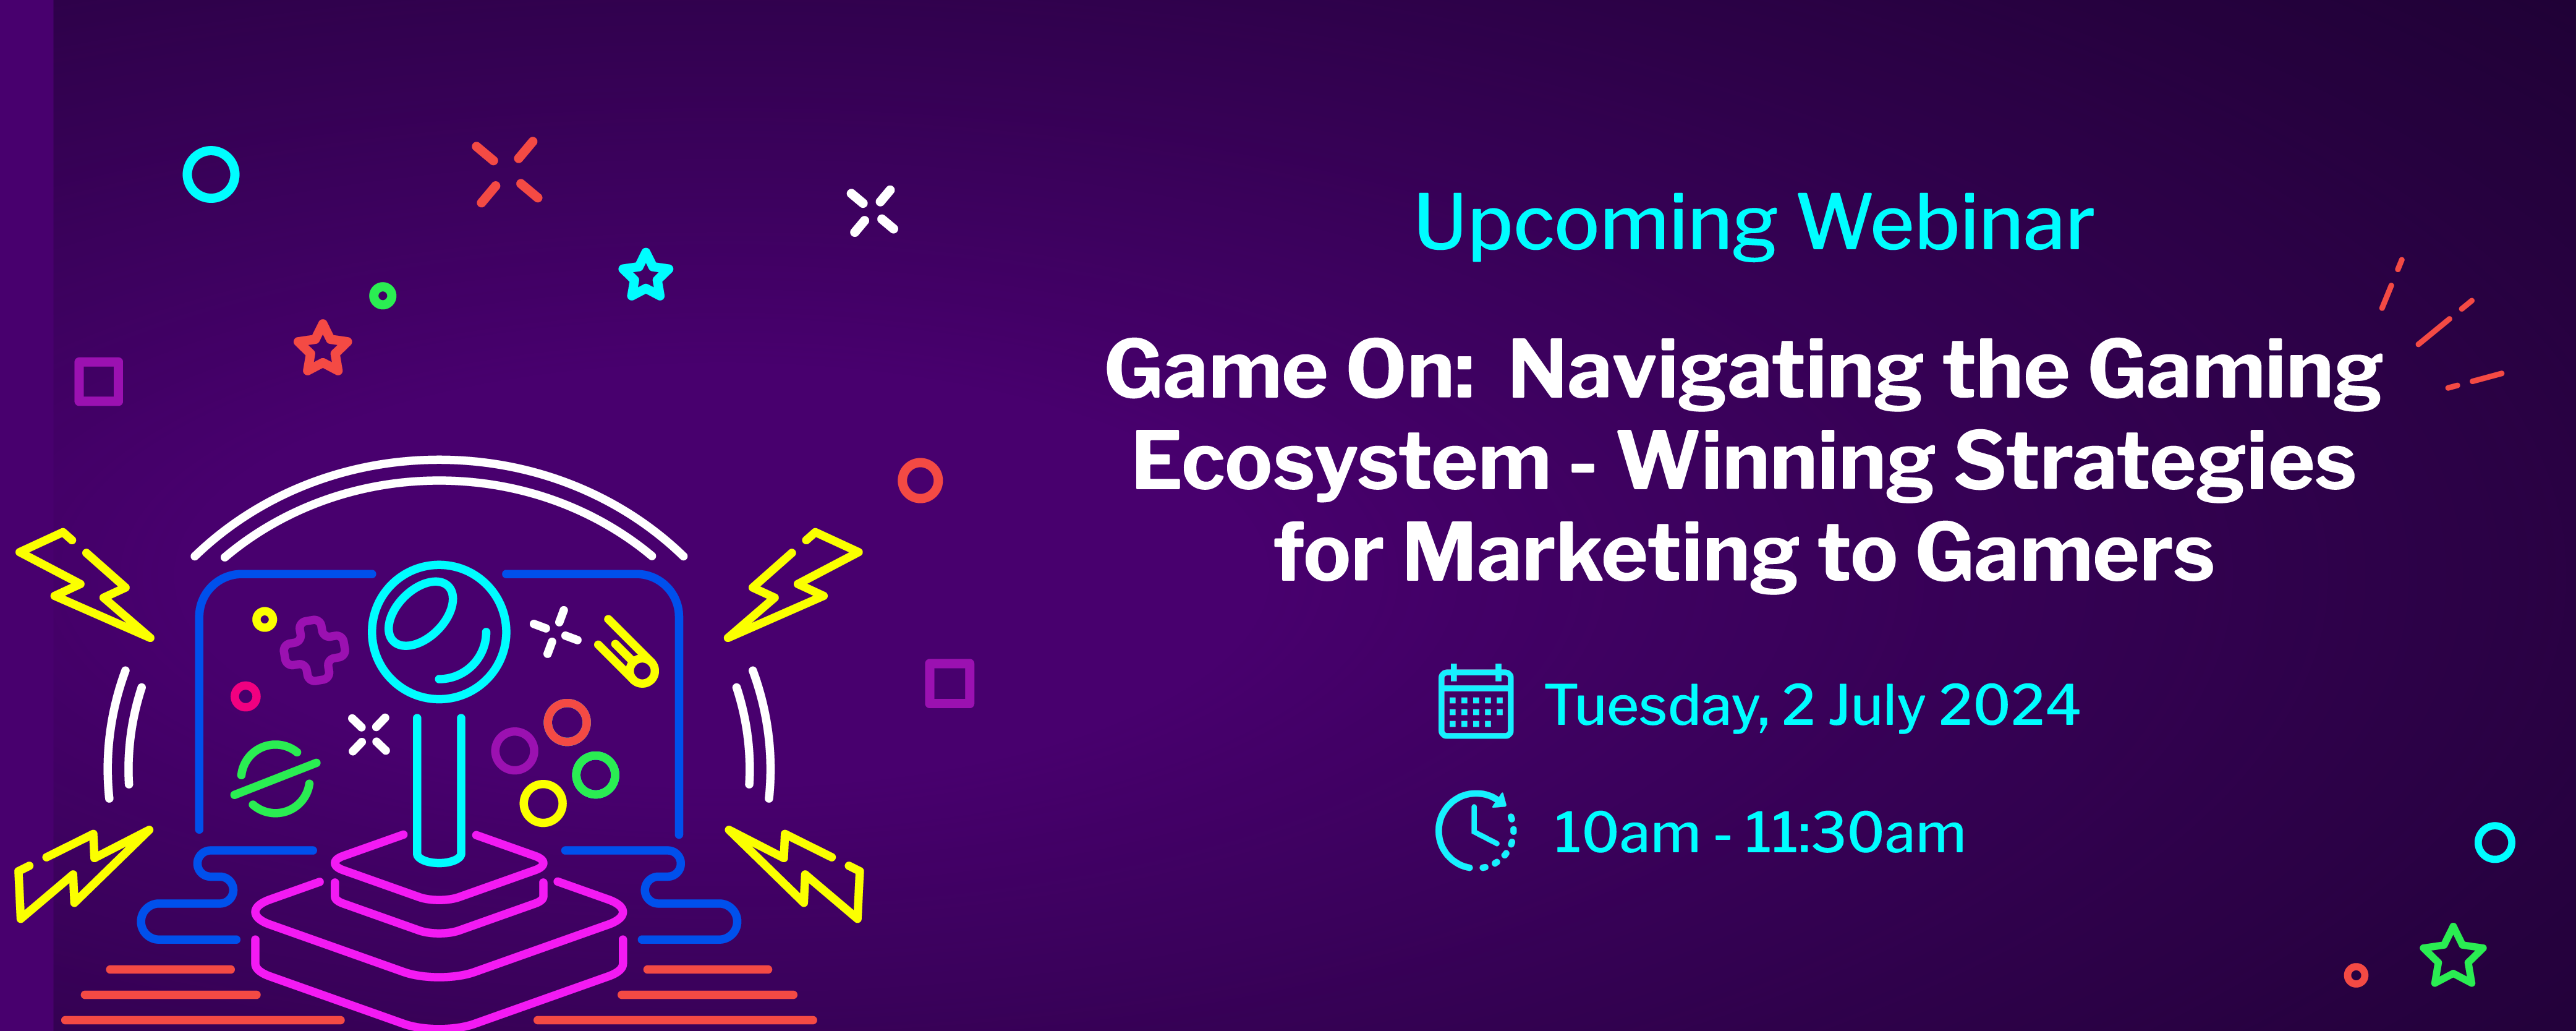 Game On: Navigating the Gaming Ecosystem - Winning Strategies for Marketing to Gamers